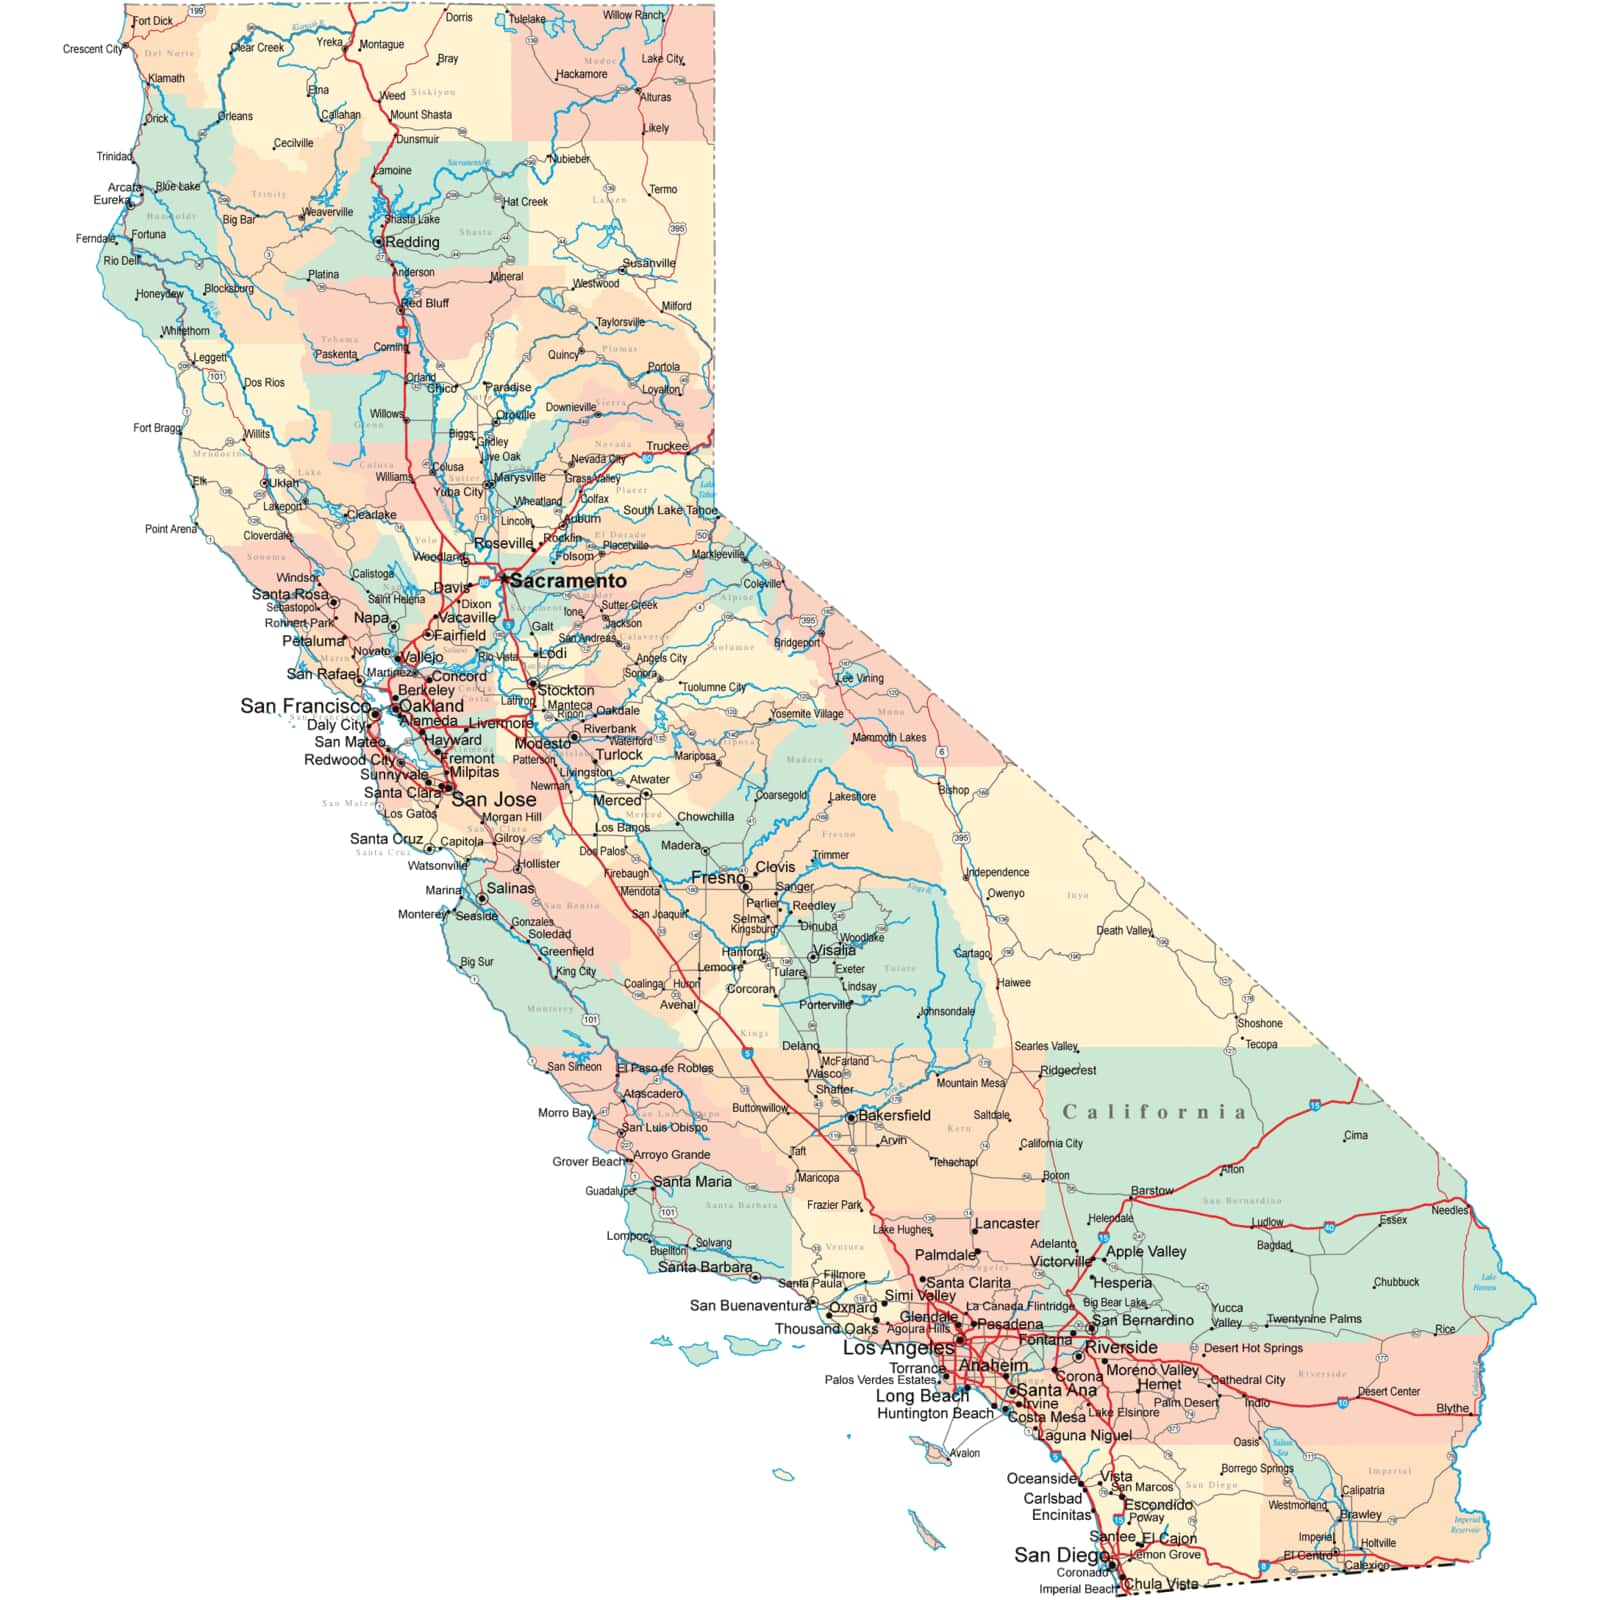 California Road Map Square ?format=jpg&scale.option=fill&scale.width=1600&quality=60